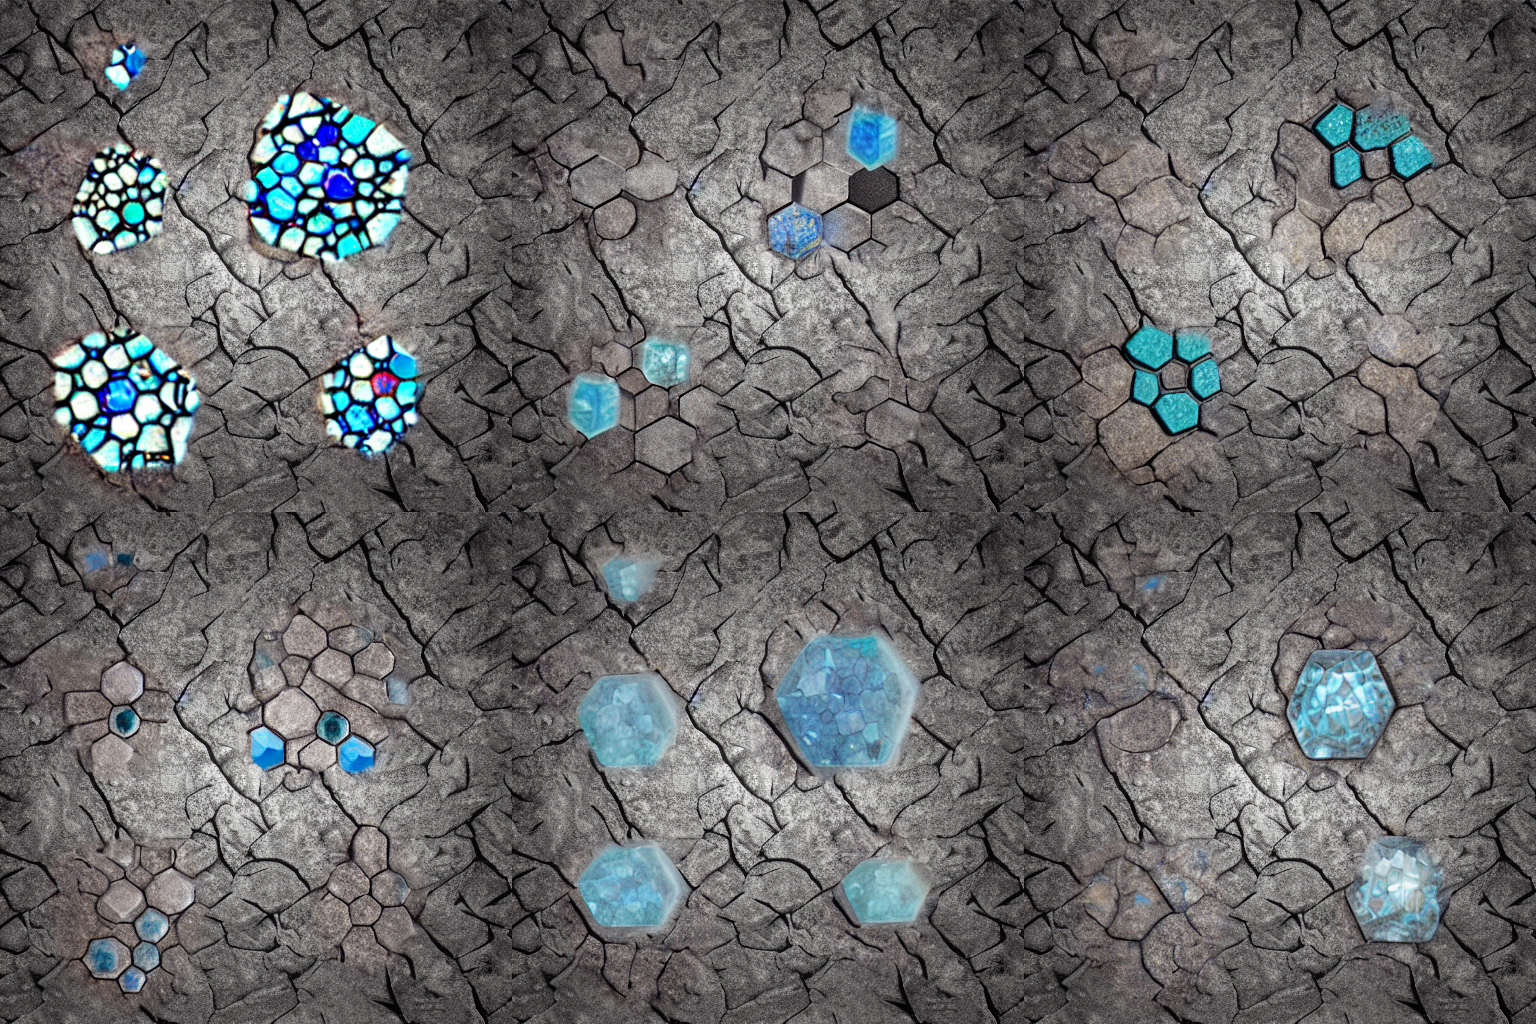 A tiled image showing six prospective diamond ore textures. 